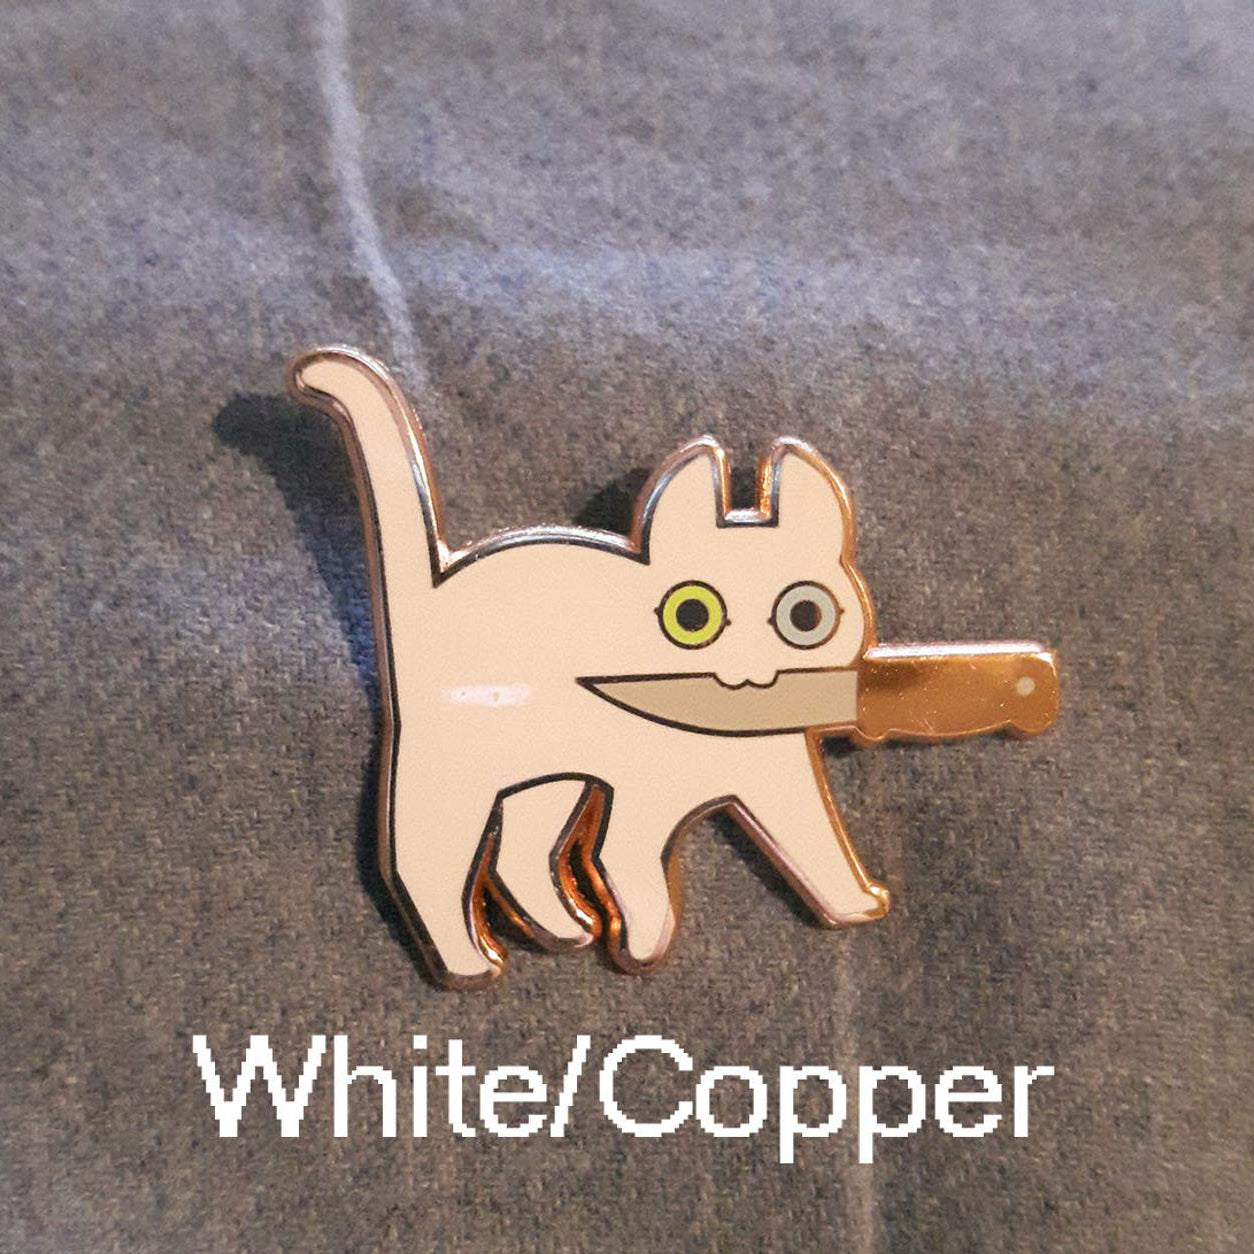 Alternate white and copper version of black cat holding knife in mouth enamel pin on grey cloth background.